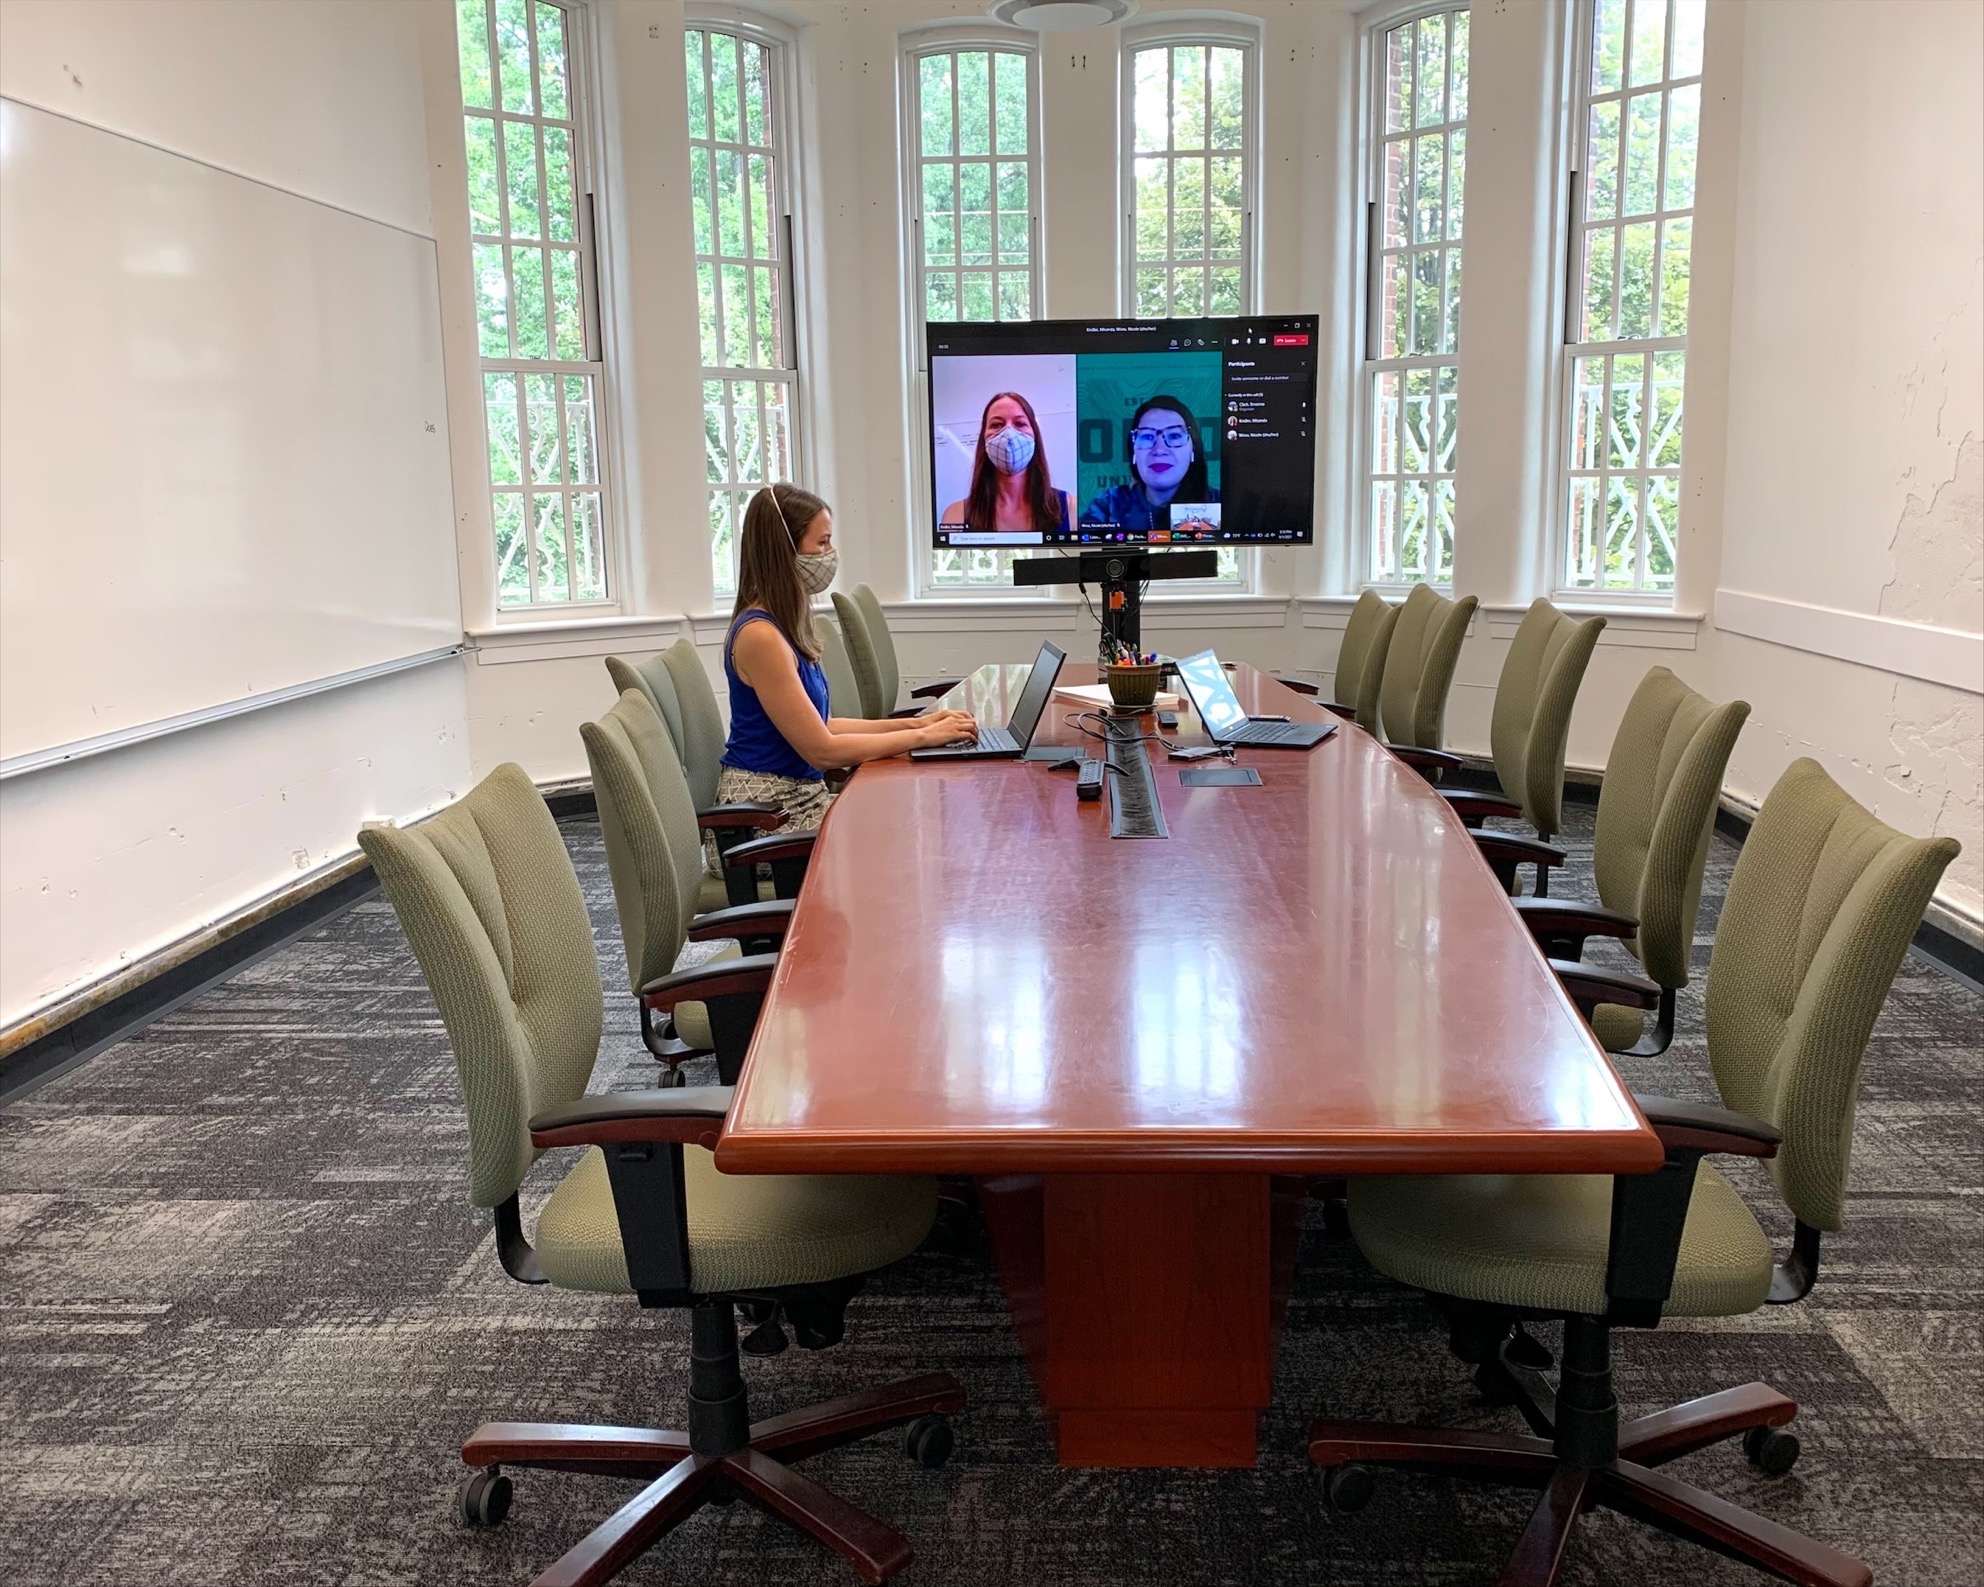 A woman sits at an empty conference table, with two people displayed on the TV using the Teams application